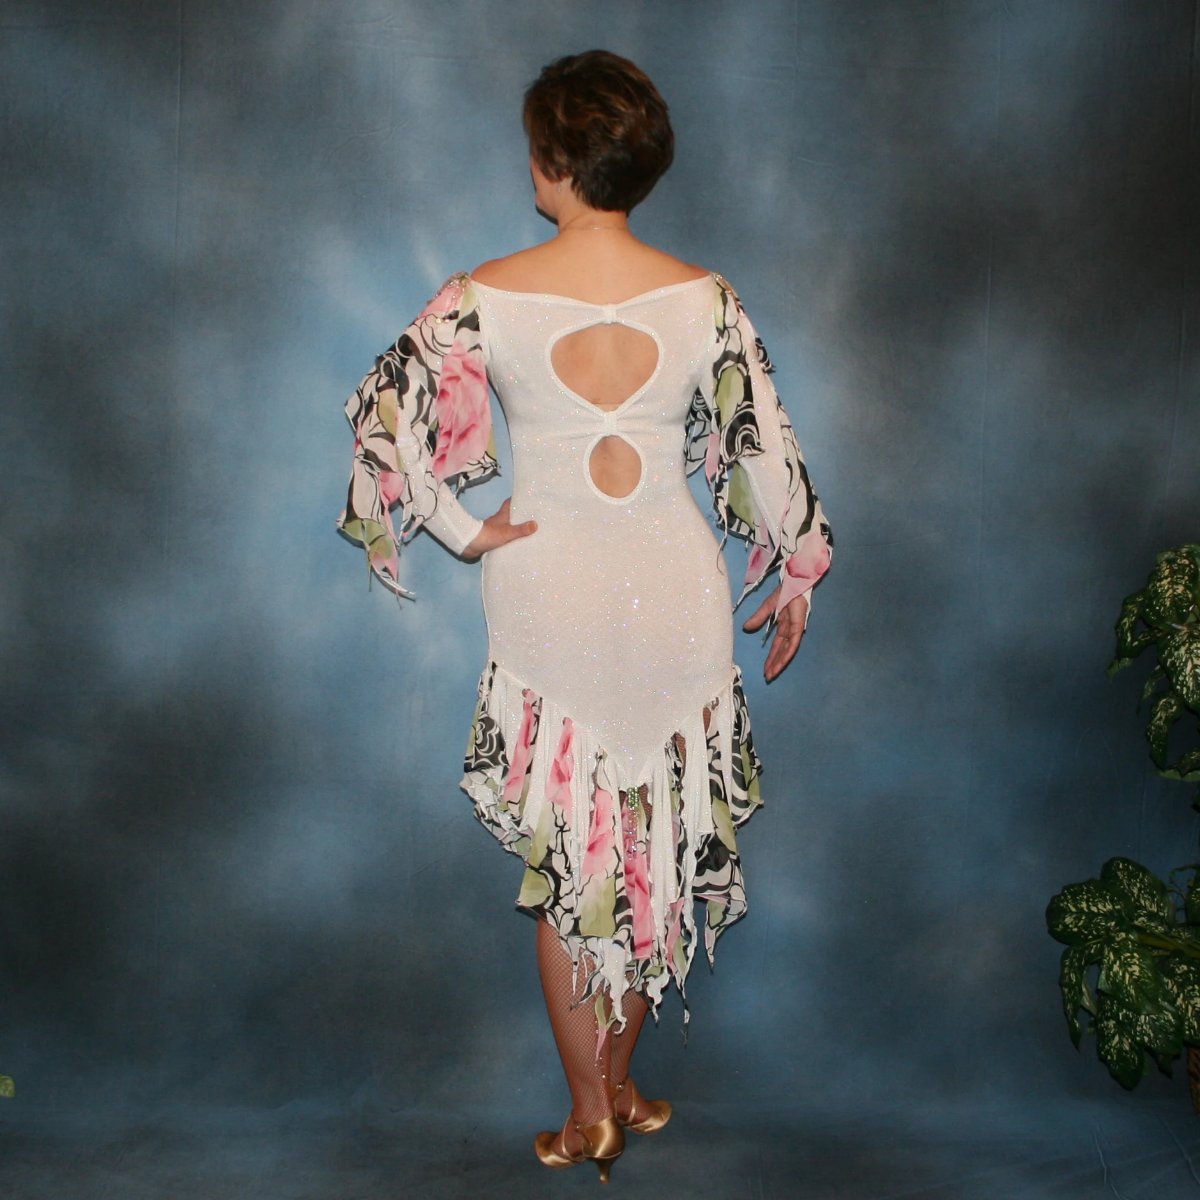 Crystal's Creations back view of White ballroom converta dress created in white glitter slinky & rose print chiffon consisting of a Latin/rhythm dress with cascades of flounces on sleeves & skirt bottom